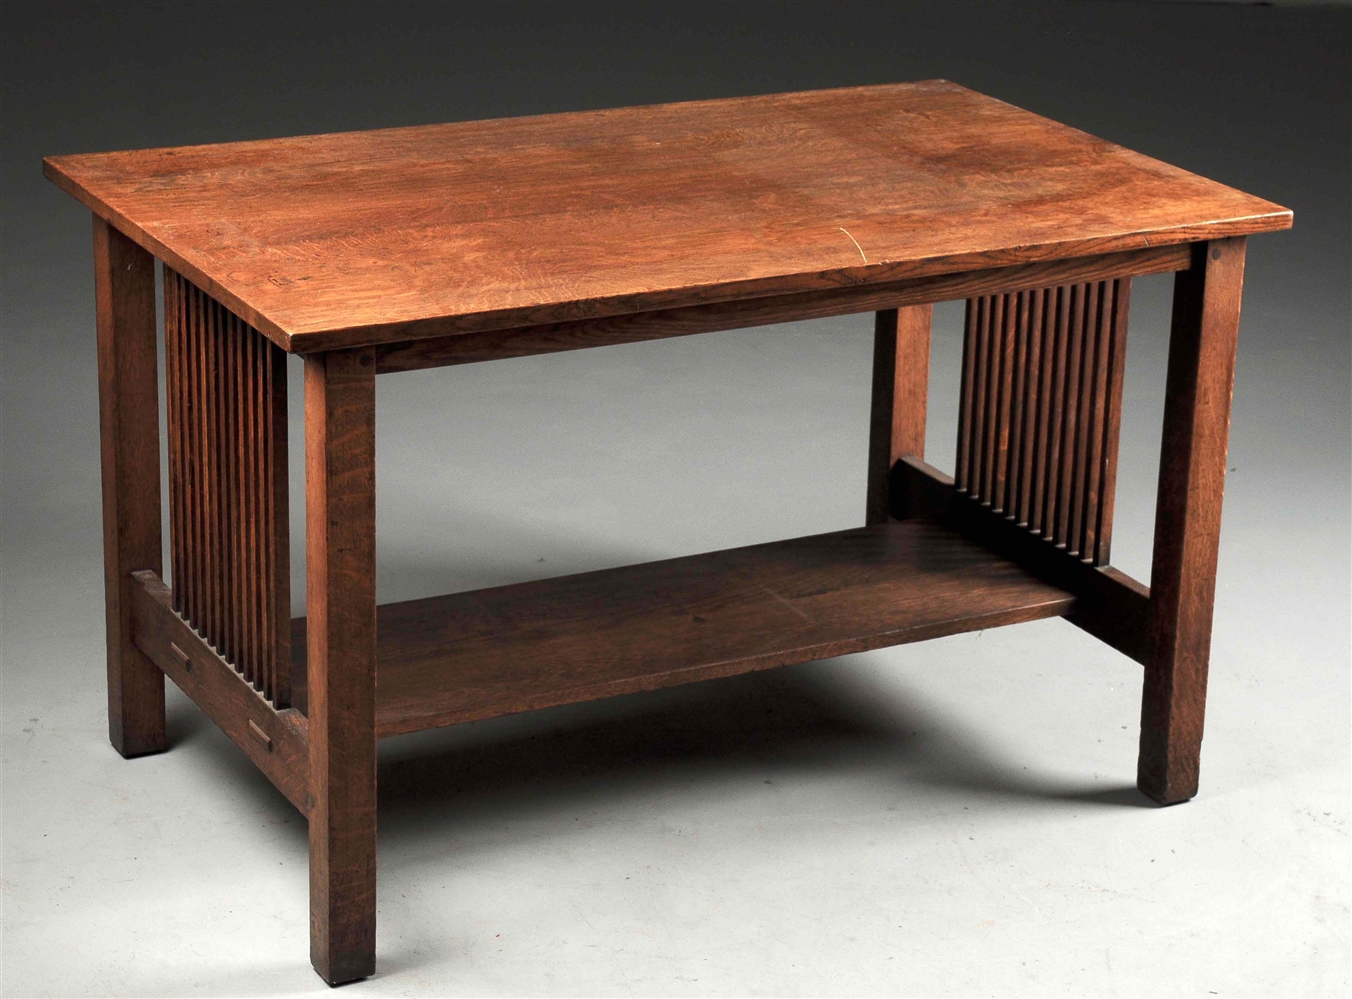 GUSTAV STICKLEY SPINDLE SIDED LIBRARY TABLE NO. 657.